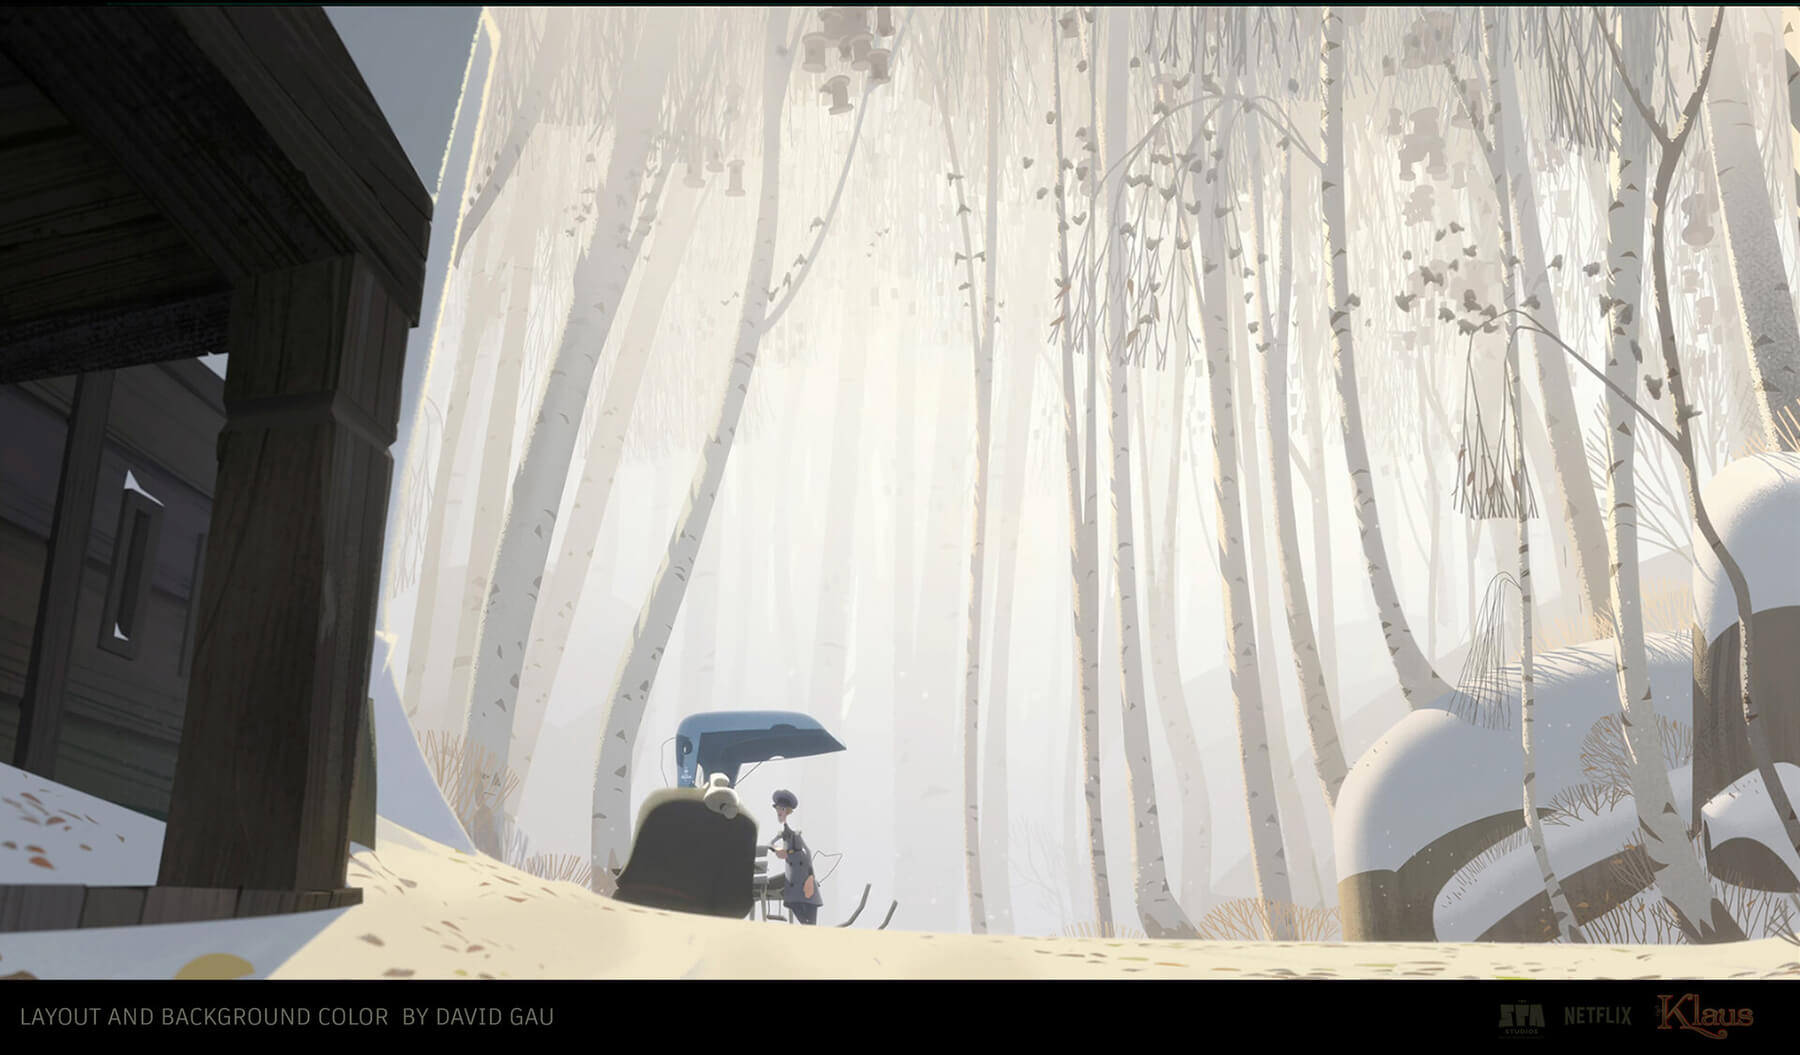  Two characters stand by an old-fashion carriage in the middle of a bright snow-covered forest.